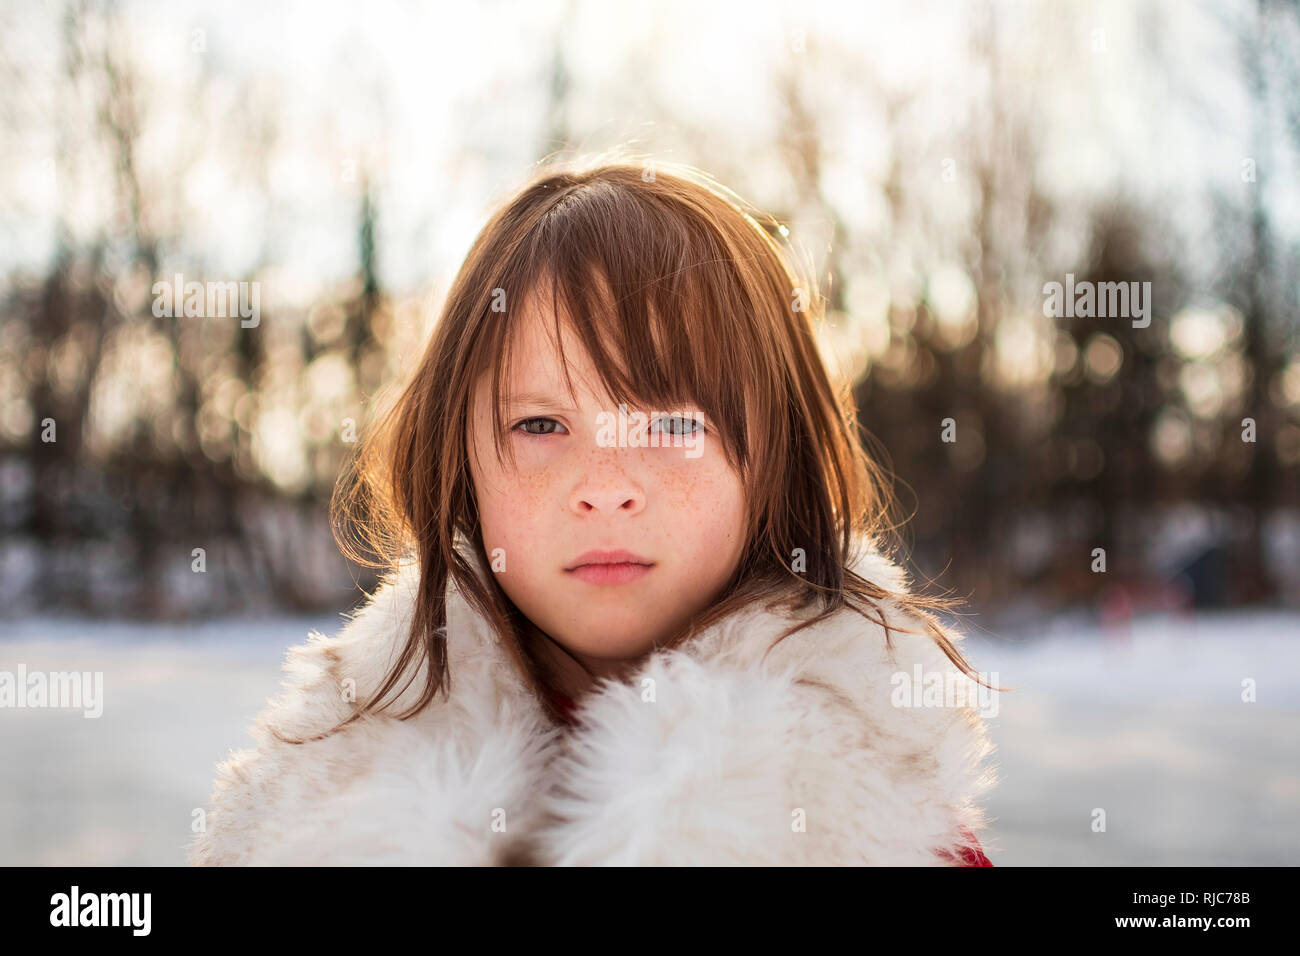 Portrait of a girl standing in snow, United States Stock Photo